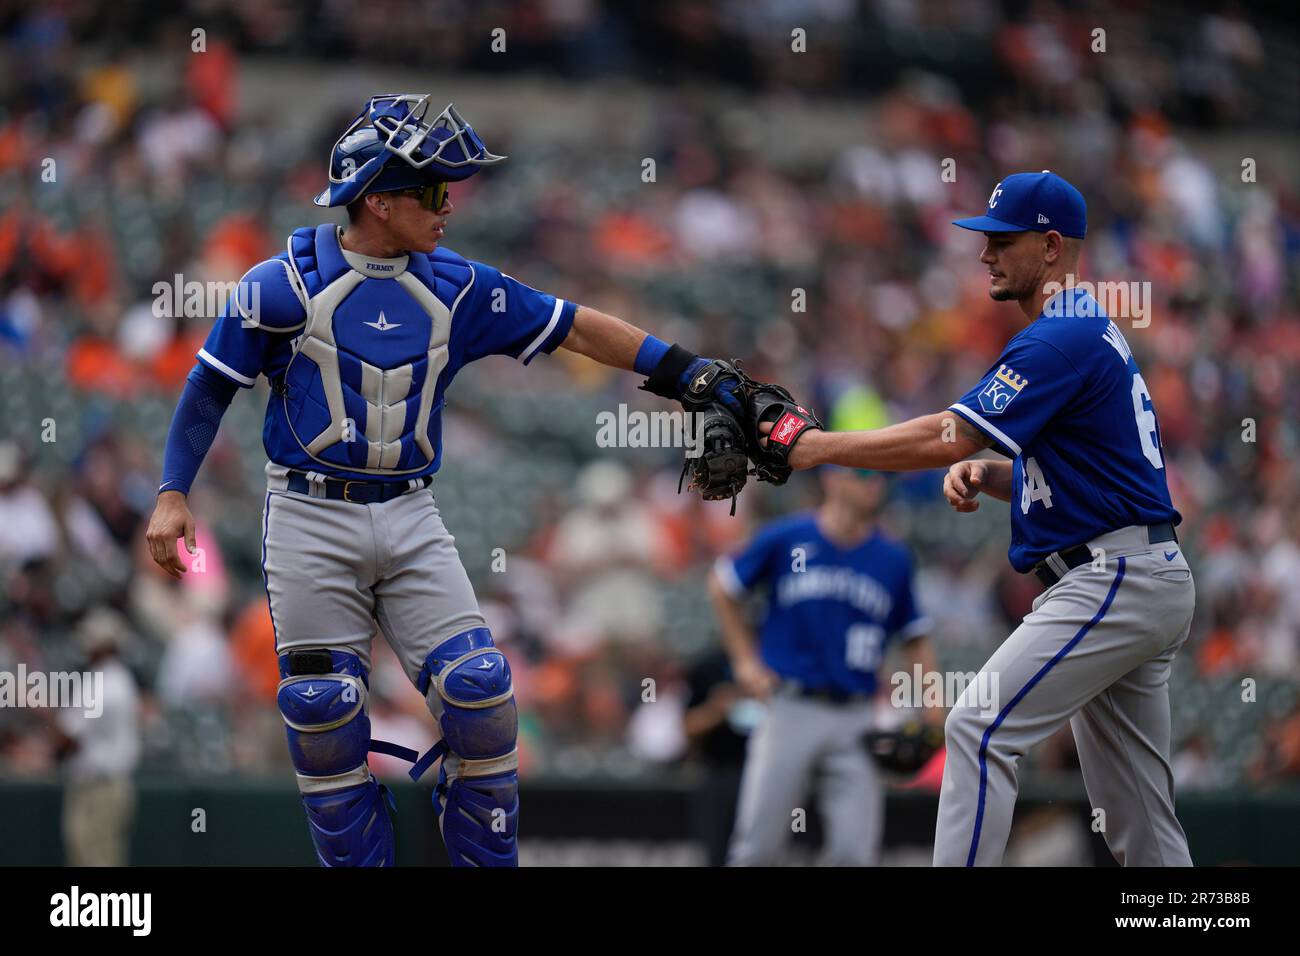 Freddy Fermin of the Kansas City Royals celebrates after his walk